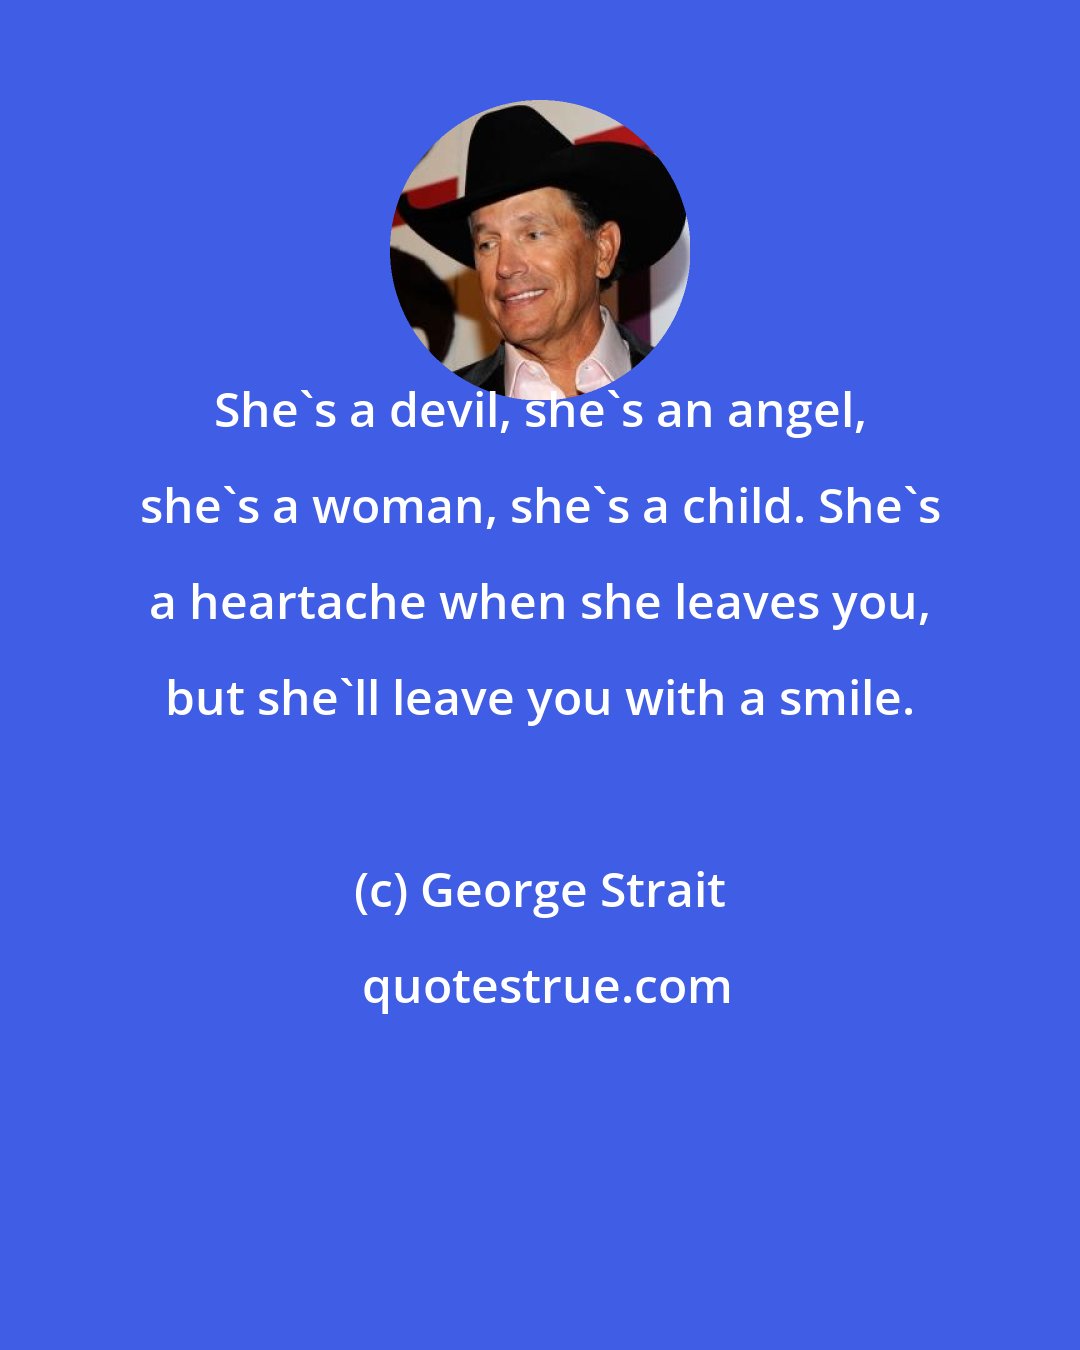 George Strait: She's a devil, she's an angel, she's a woman, she's a child. She's a heartache when she leaves you, but she'll leave you with a smile.